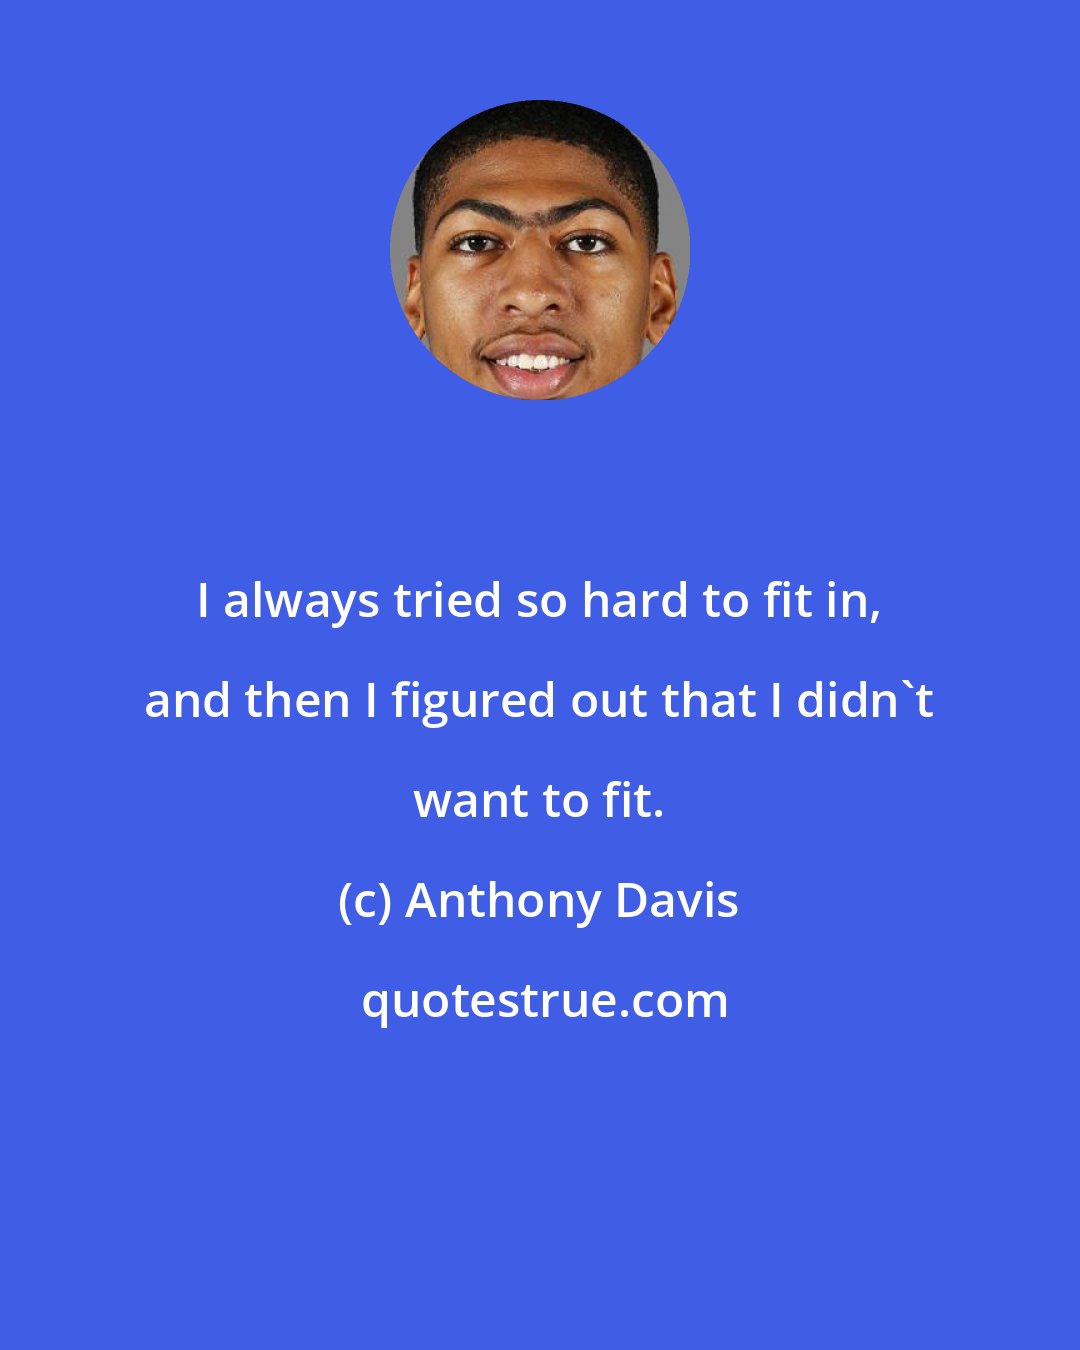 Anthony Davis: I always tried so hard to fit in, and then I figured out that I didn't want to fit.